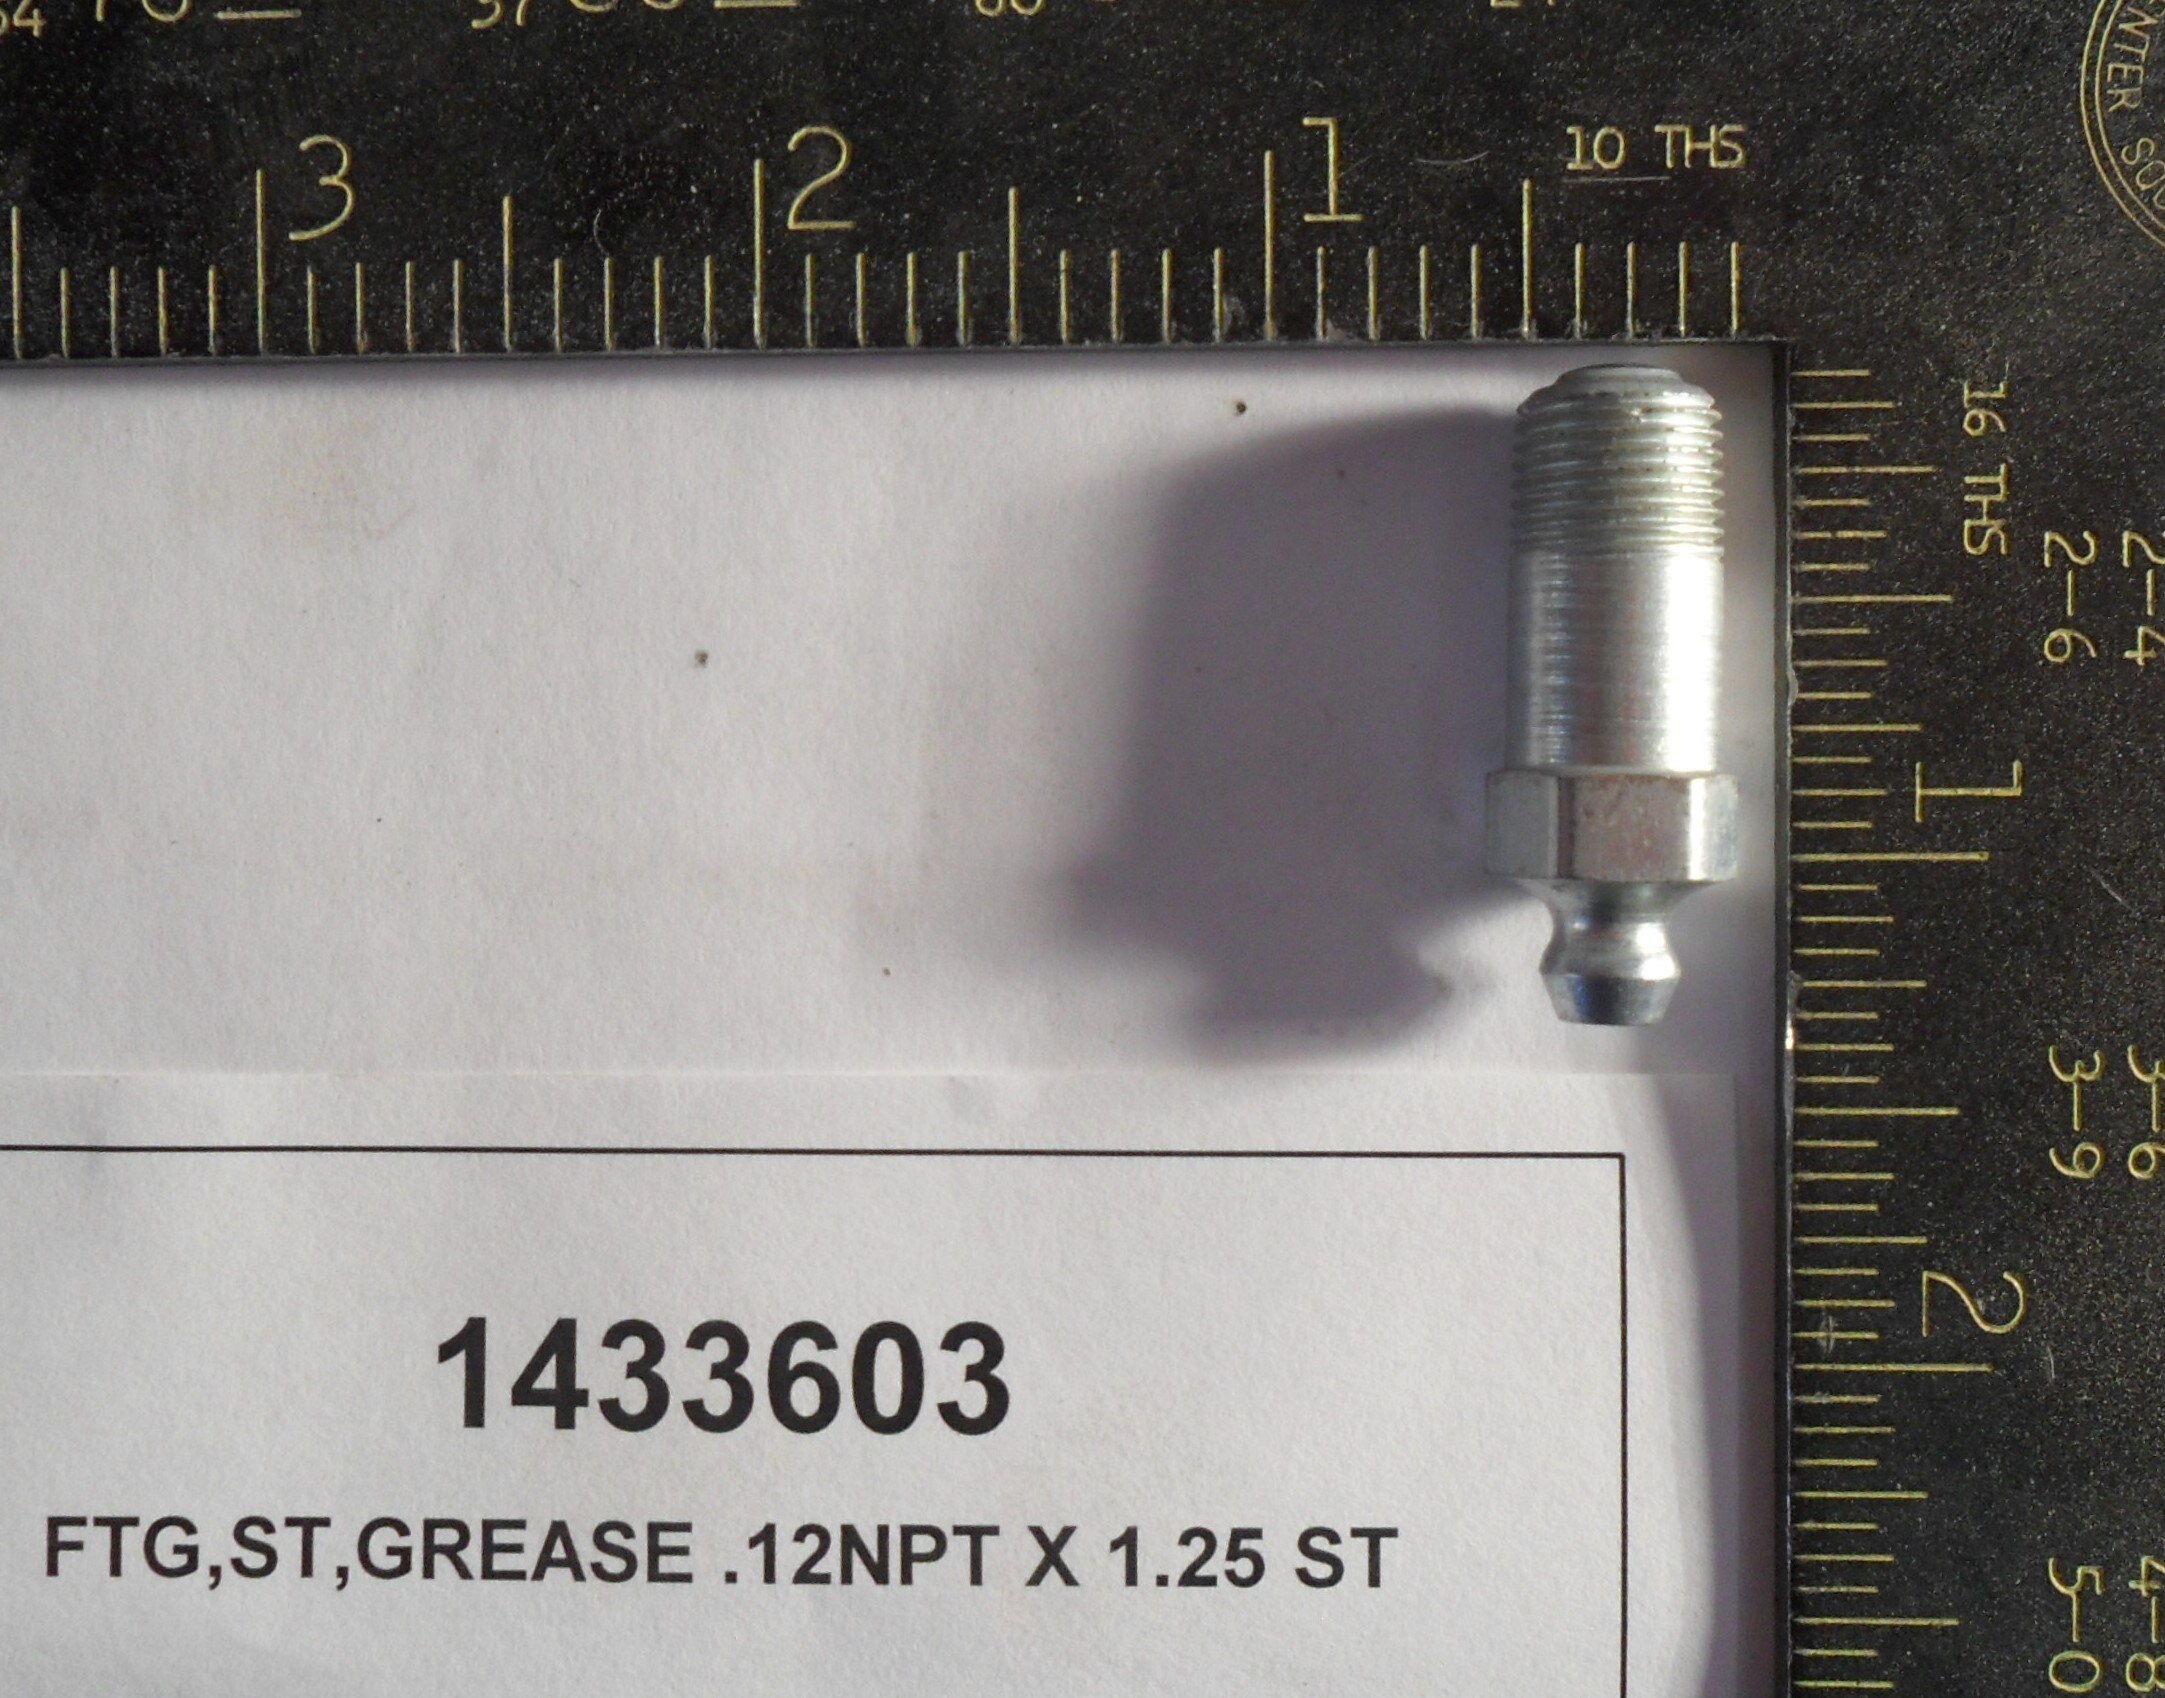 FTG,ST,GREASE .12NPT X 1.25 ST